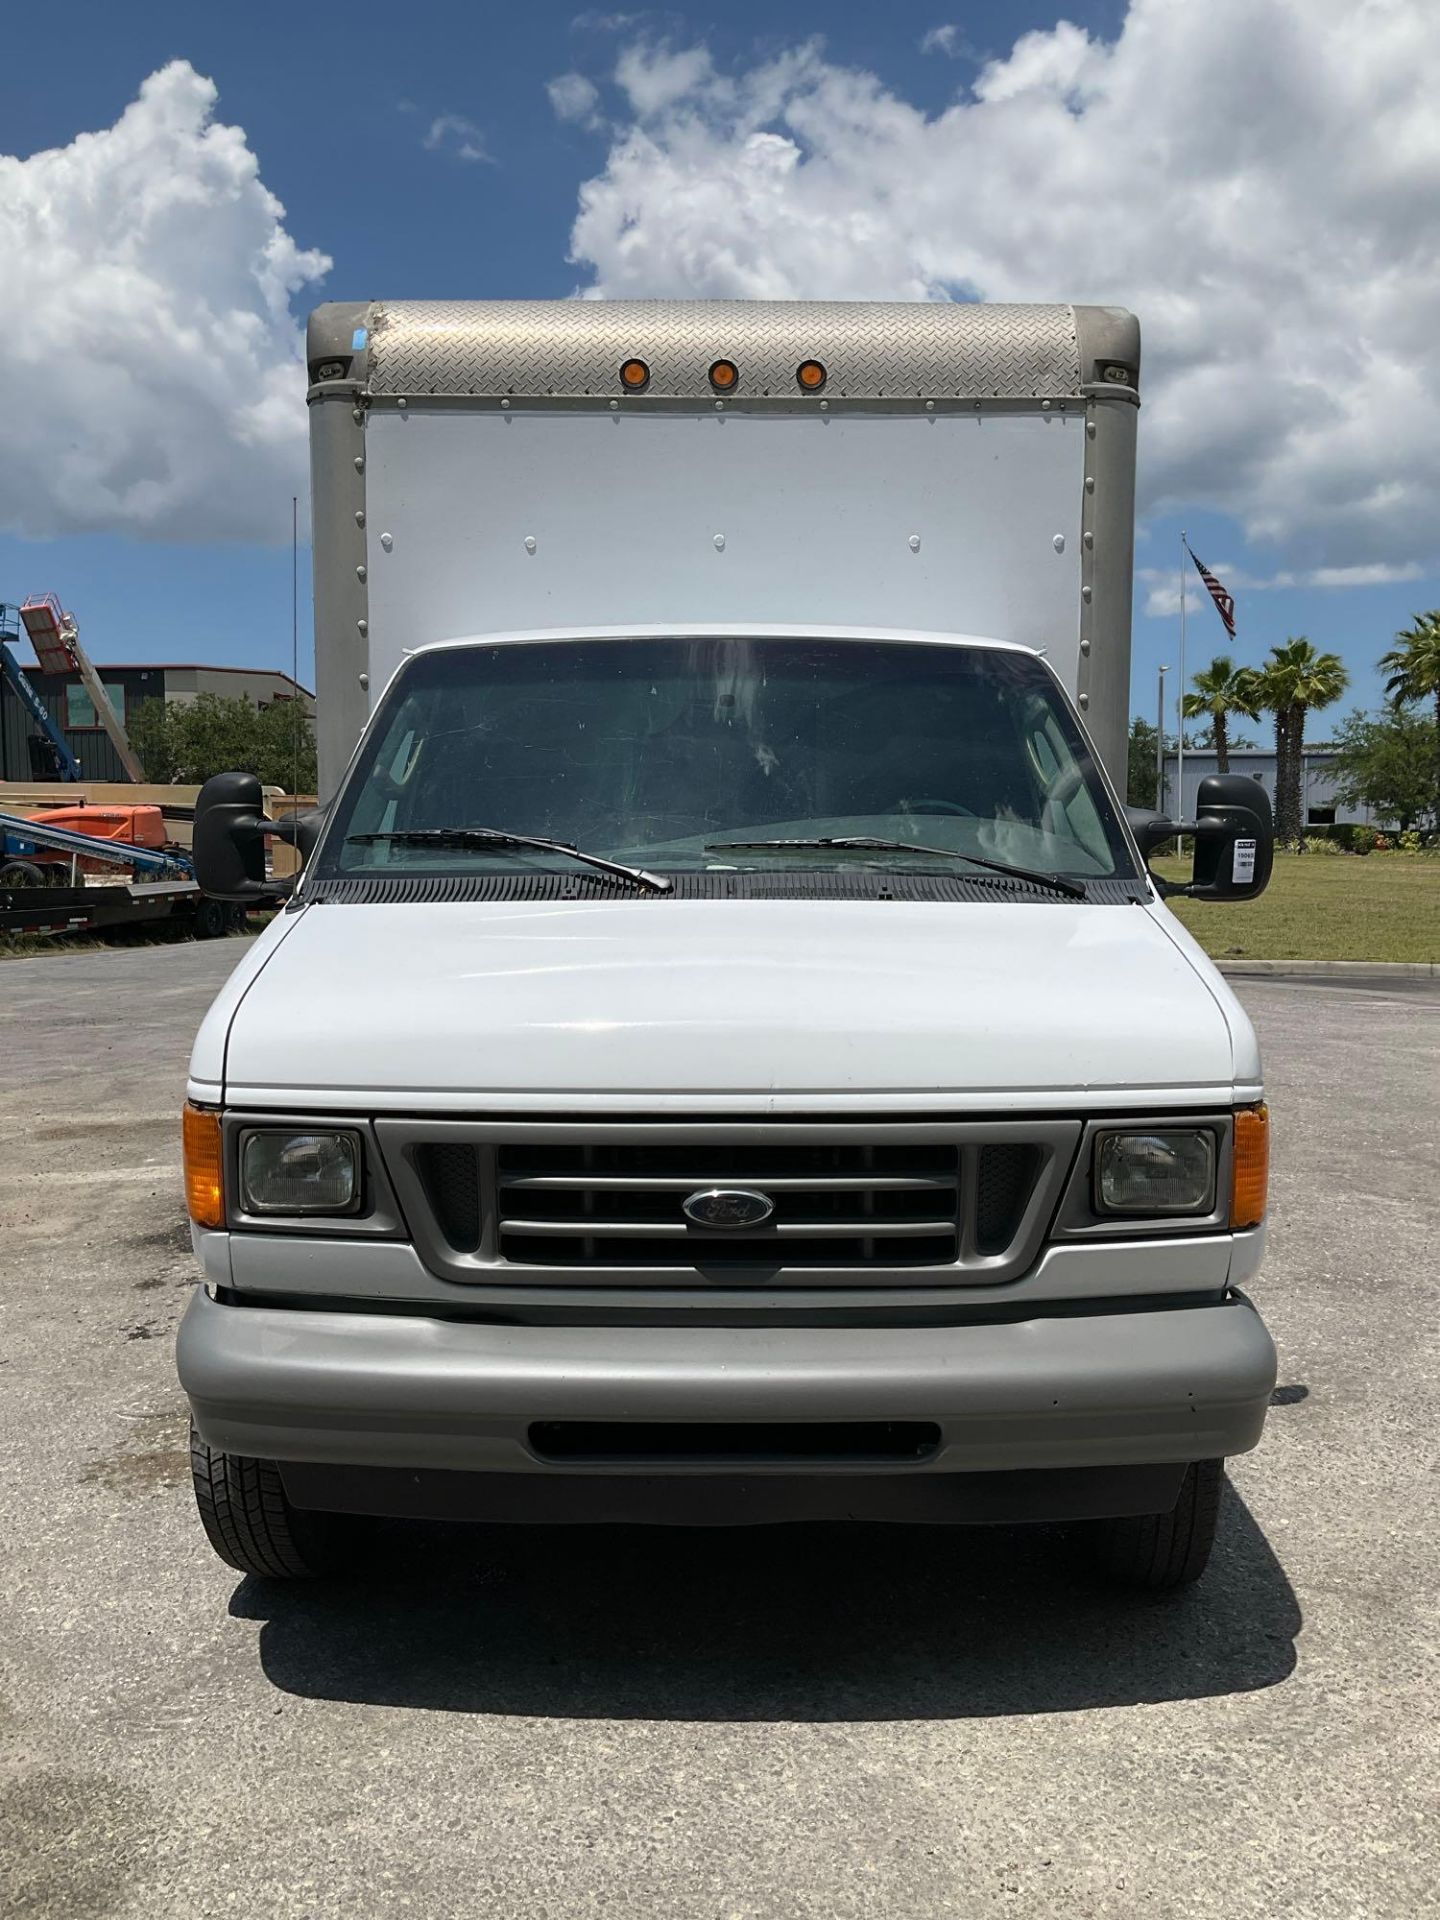 2003 FORD E-SERIES E350 CUTAWAY VAN, GAS AUTOMATIC, GVWR 11500LBS, LIFTGATE, ETRACKS, STORAGE...S... - Image 8 of 19